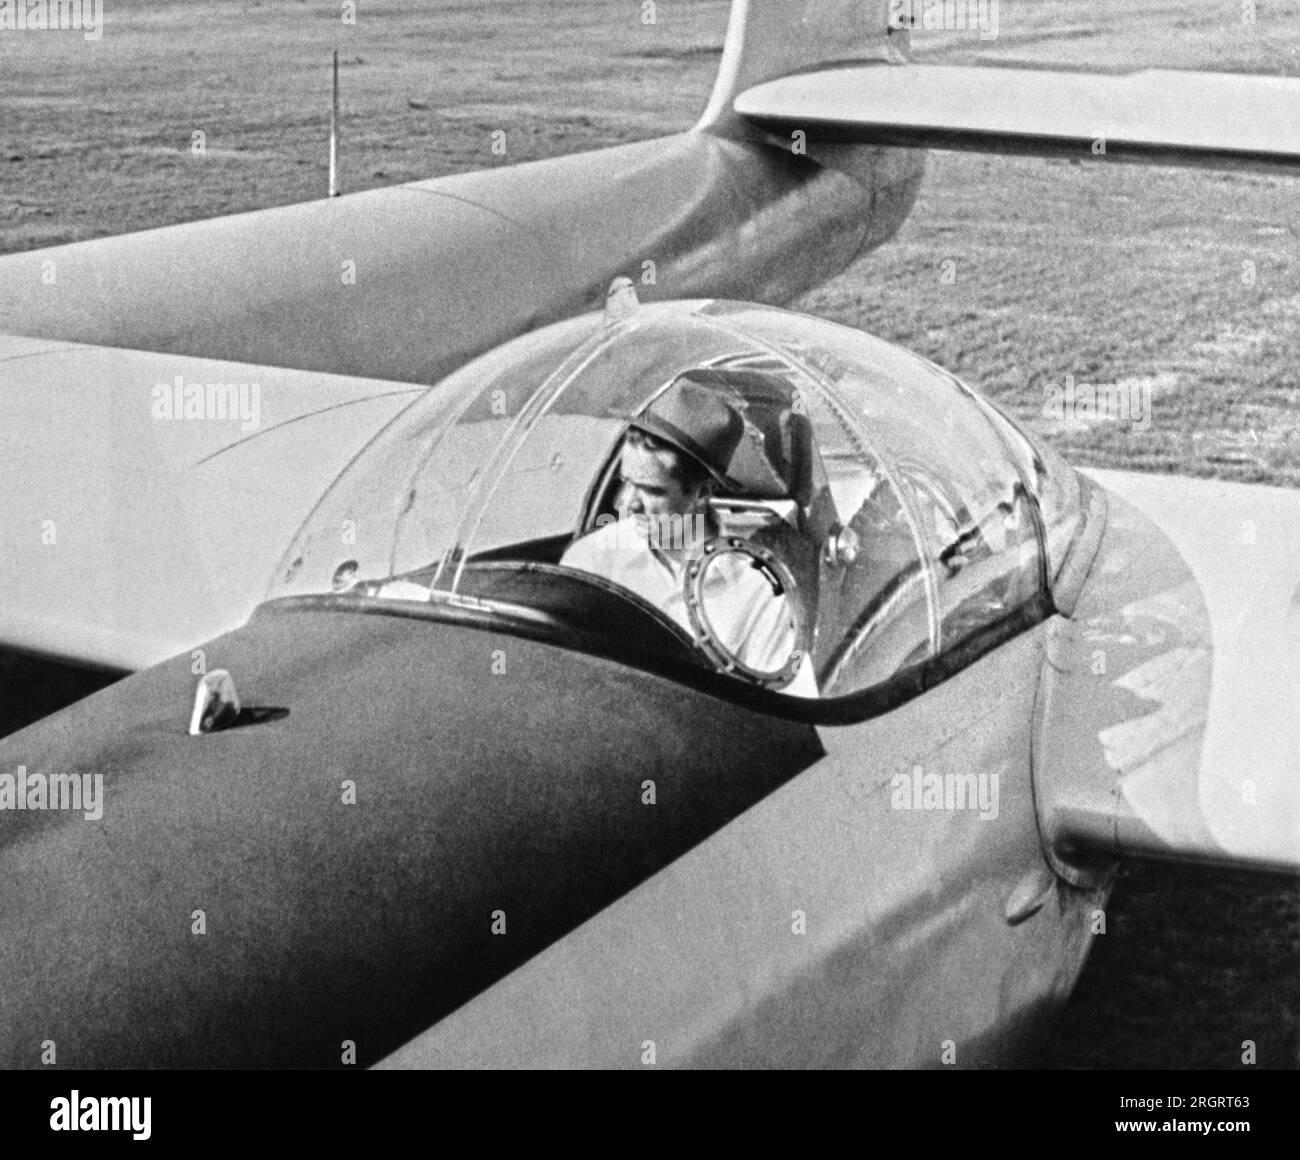 Culver City, California:   July 7, 1946 Howard Hughes sits in the cockpit of his new XF-11 plane, built in conjunction with the Army Air Material Command. It crashed on its flight, and Hughes was taken to a hospital with 3rd degree burns. It is reportedly one of the world's fastest planes and can attain speeds of over 400 mile per hour. Stock Photo